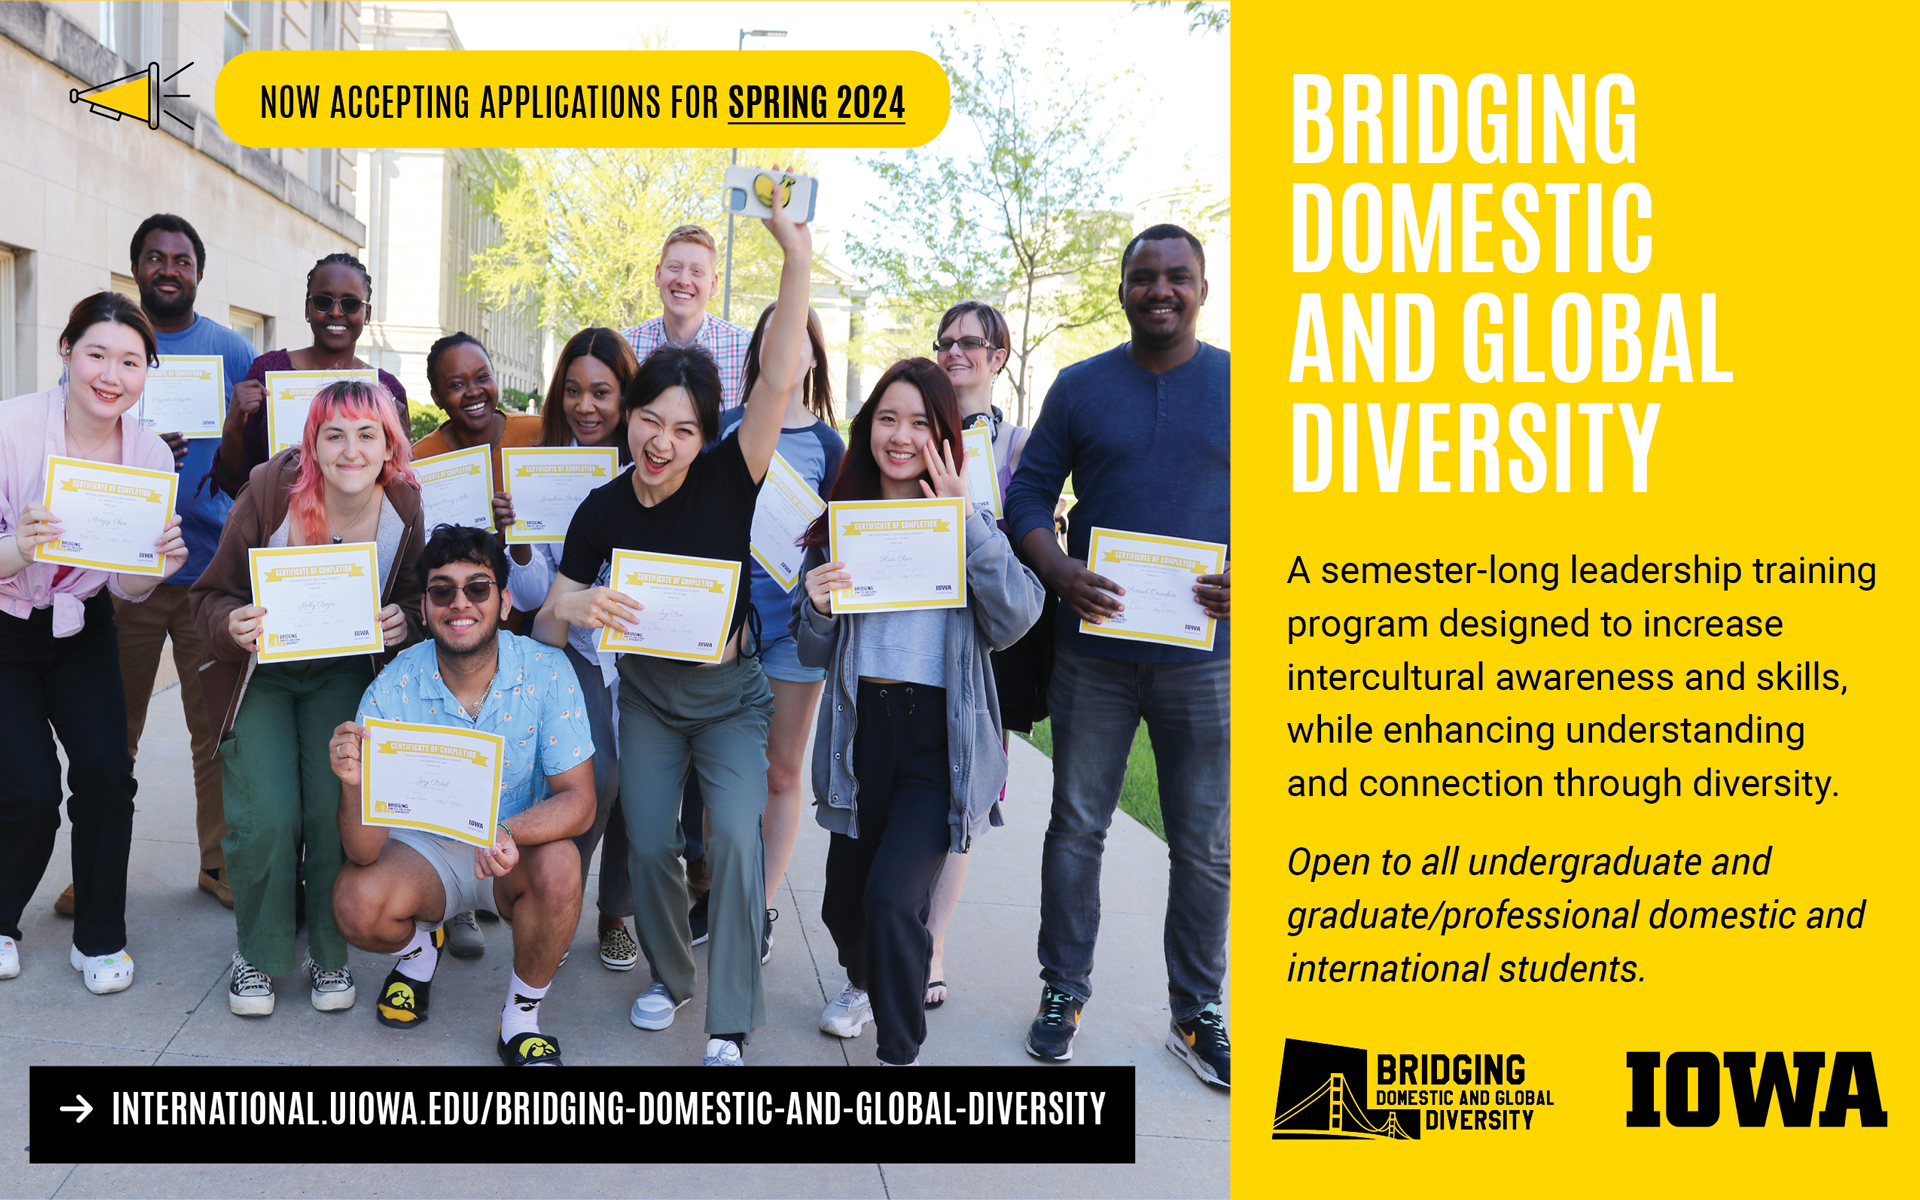 Bridging Domestic and Global Diversity: Now accepting applications for Spring 2024.